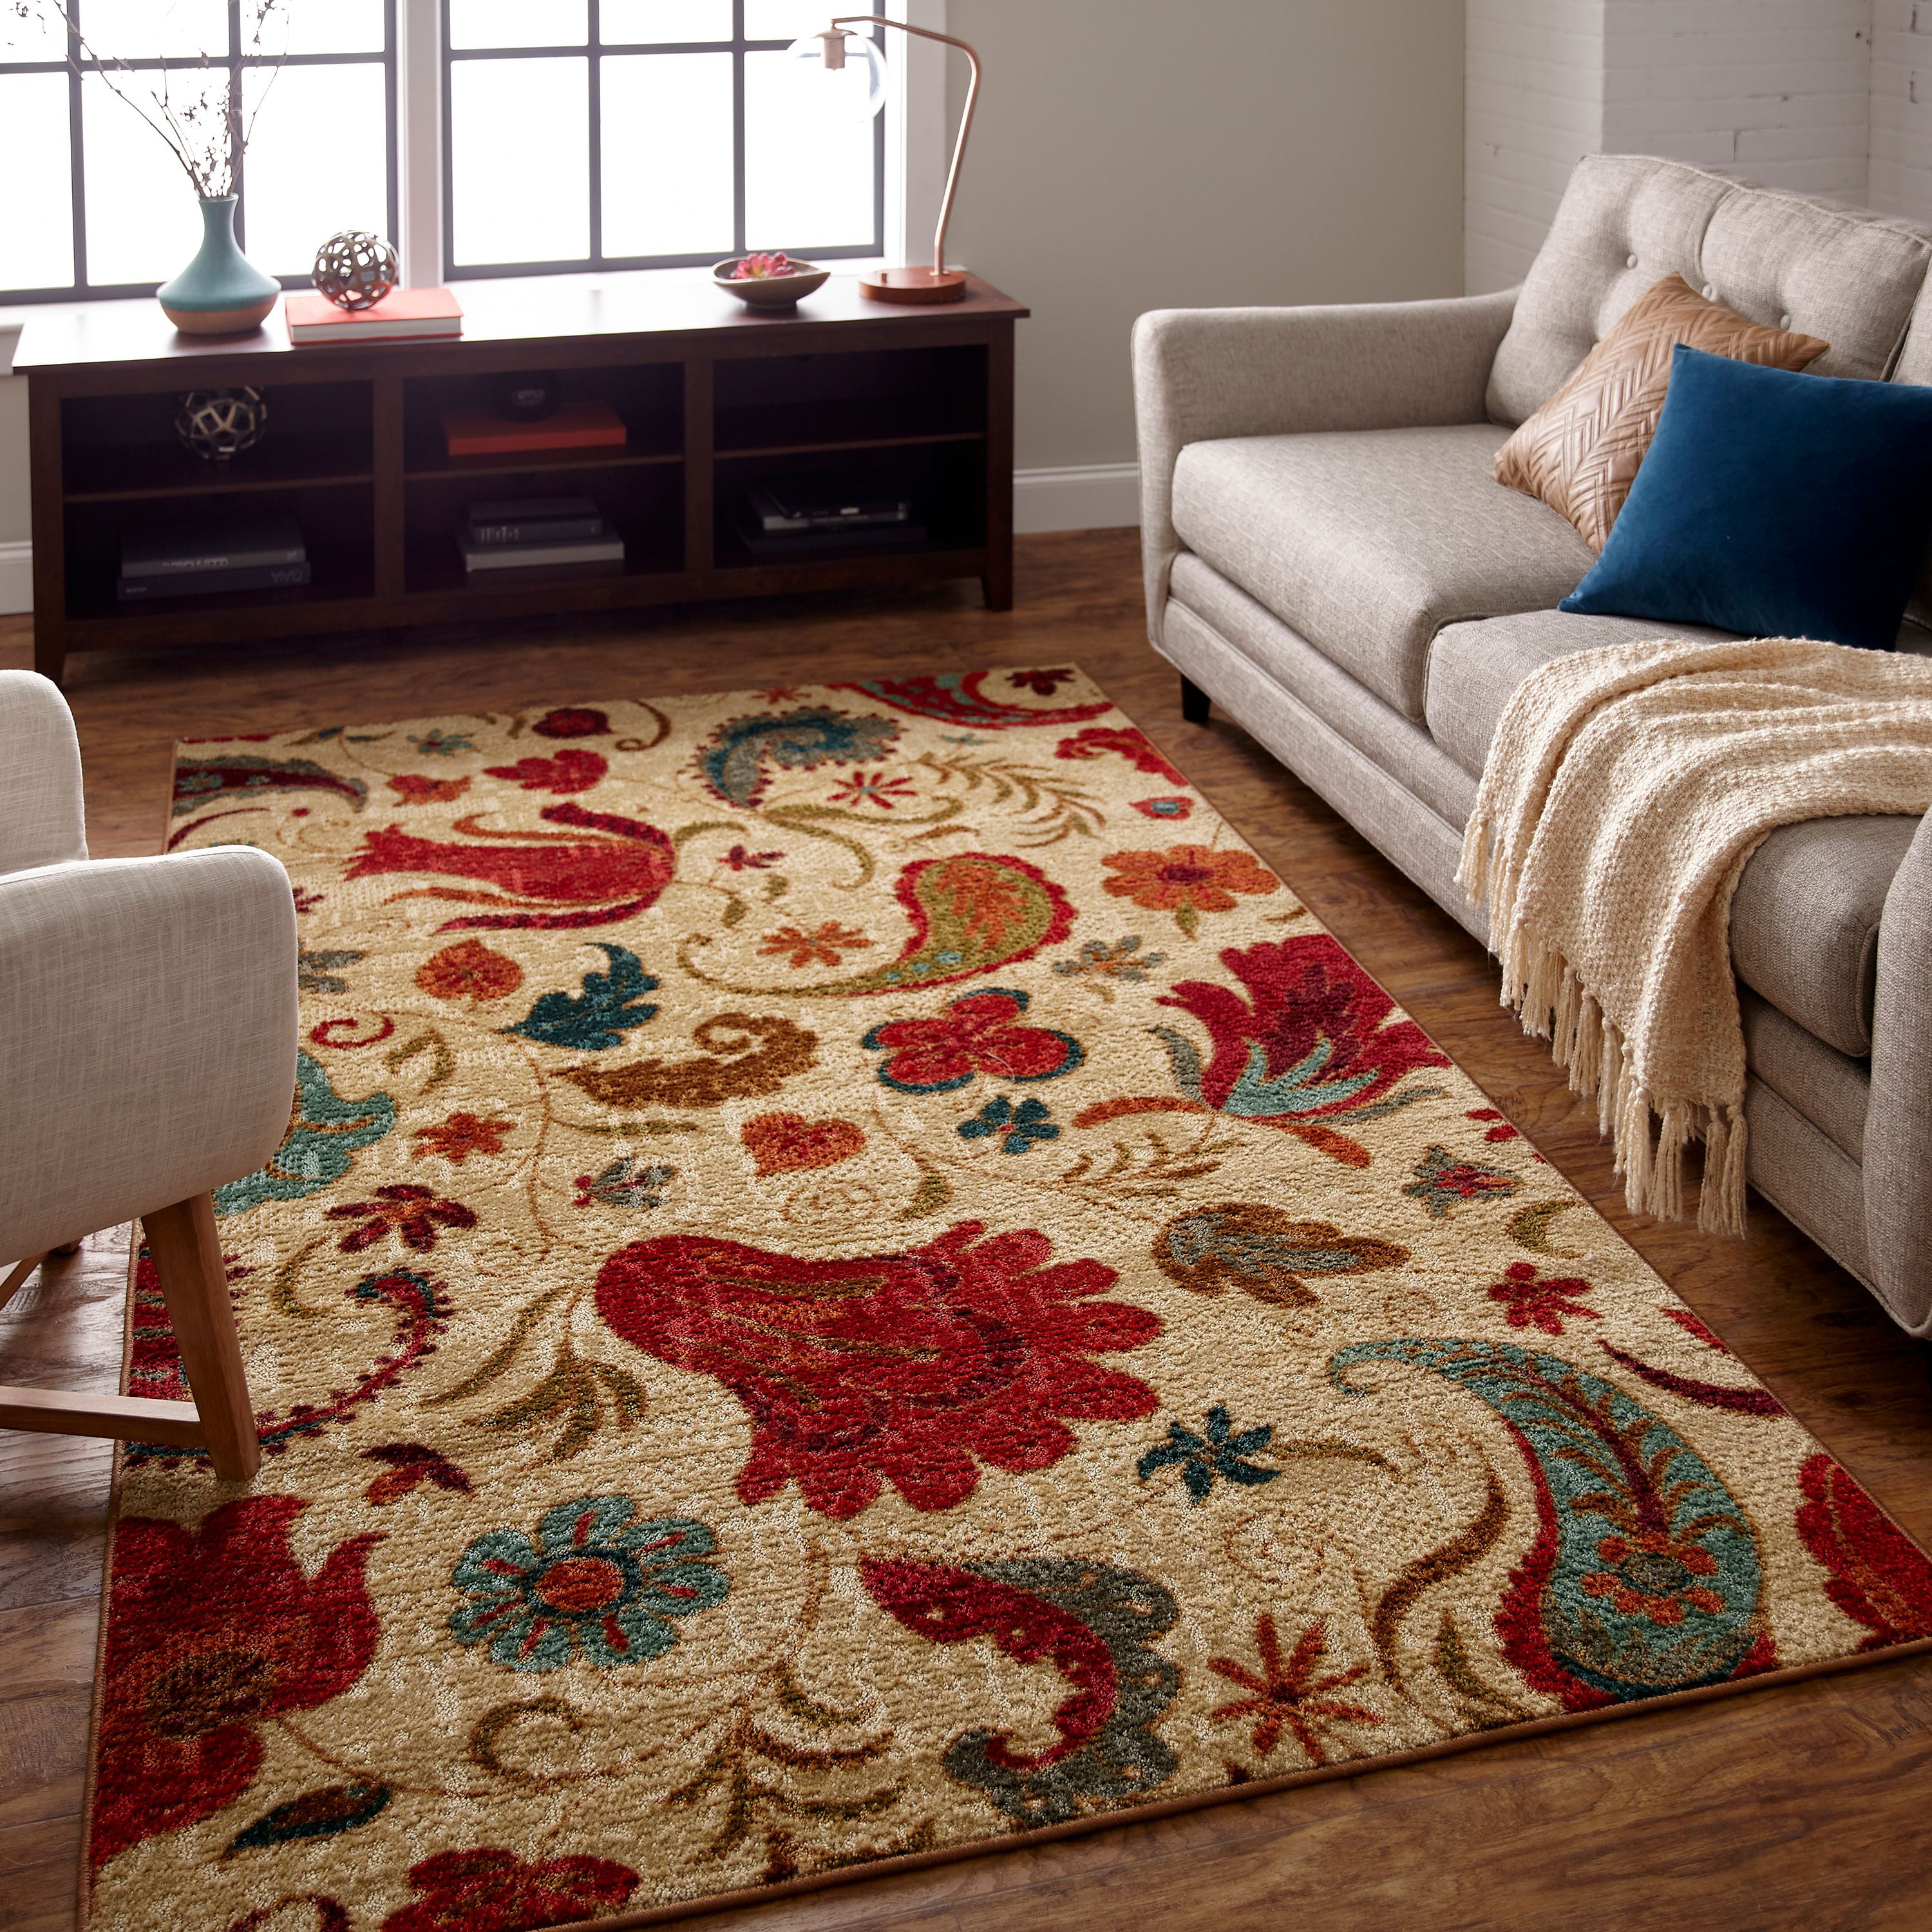 Mohawk Home Tropical Acres Fl Area, 8×10 Red Area Rug